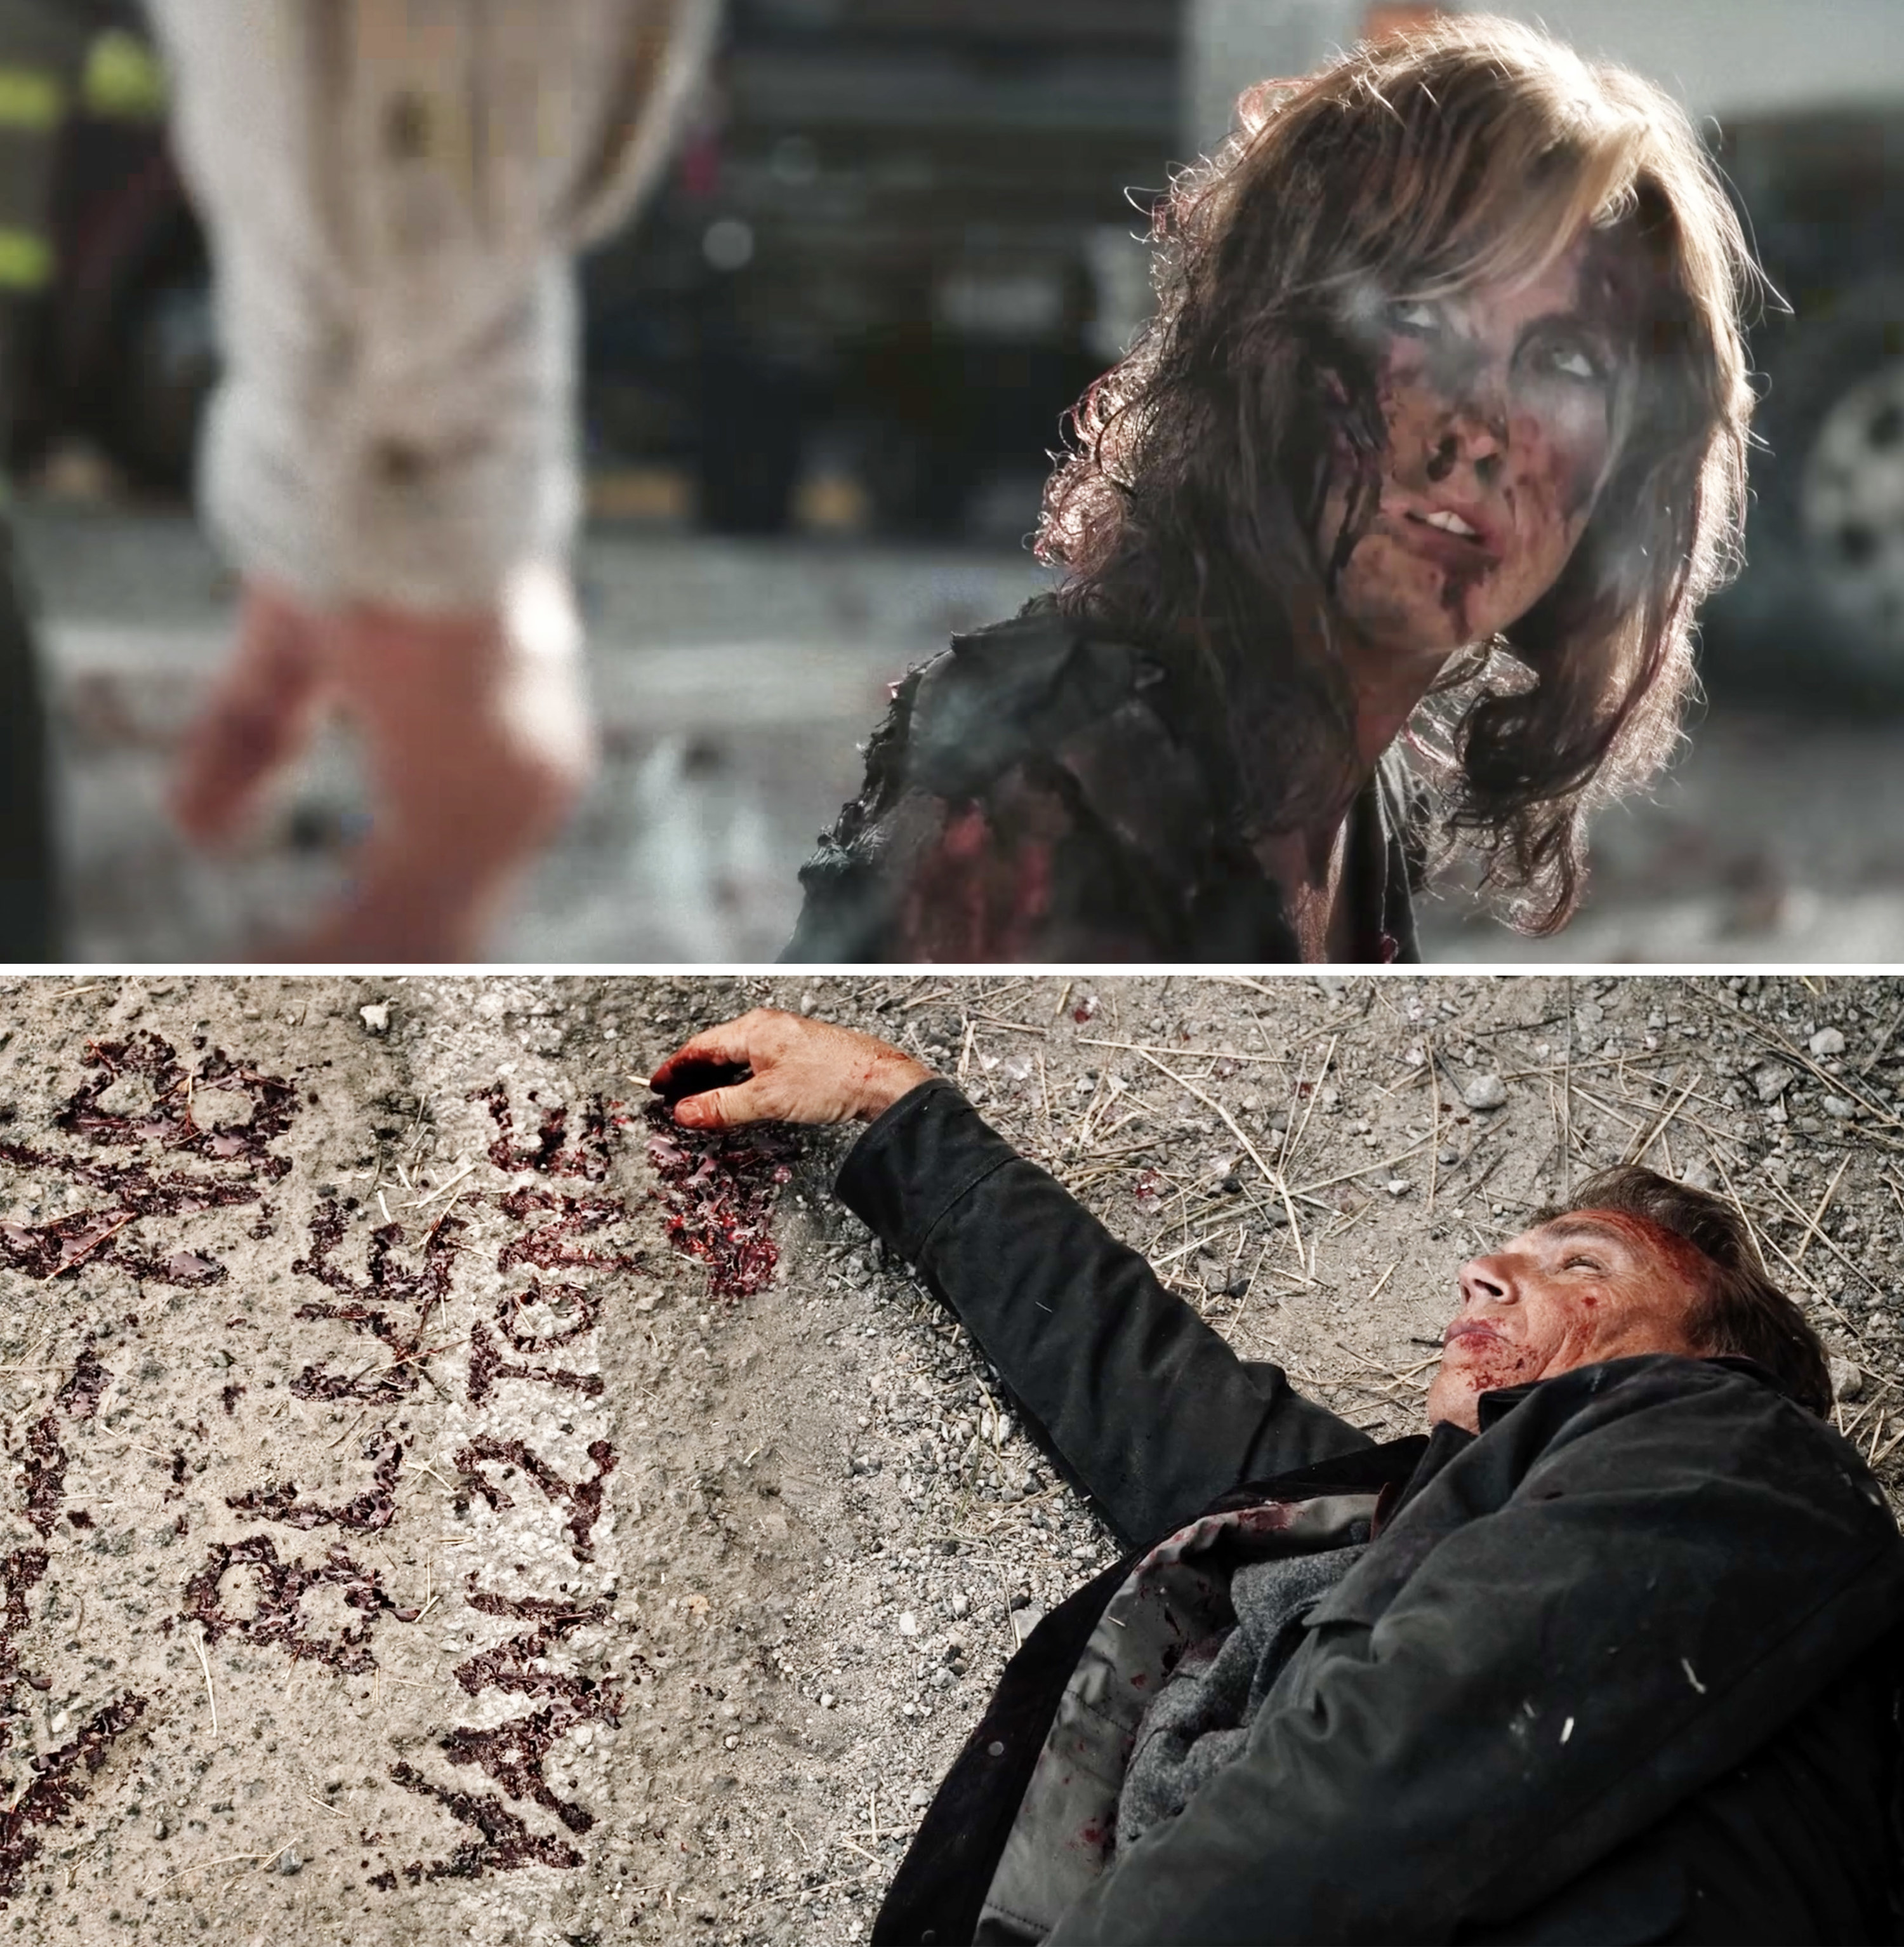 John and Beth both covered in blood